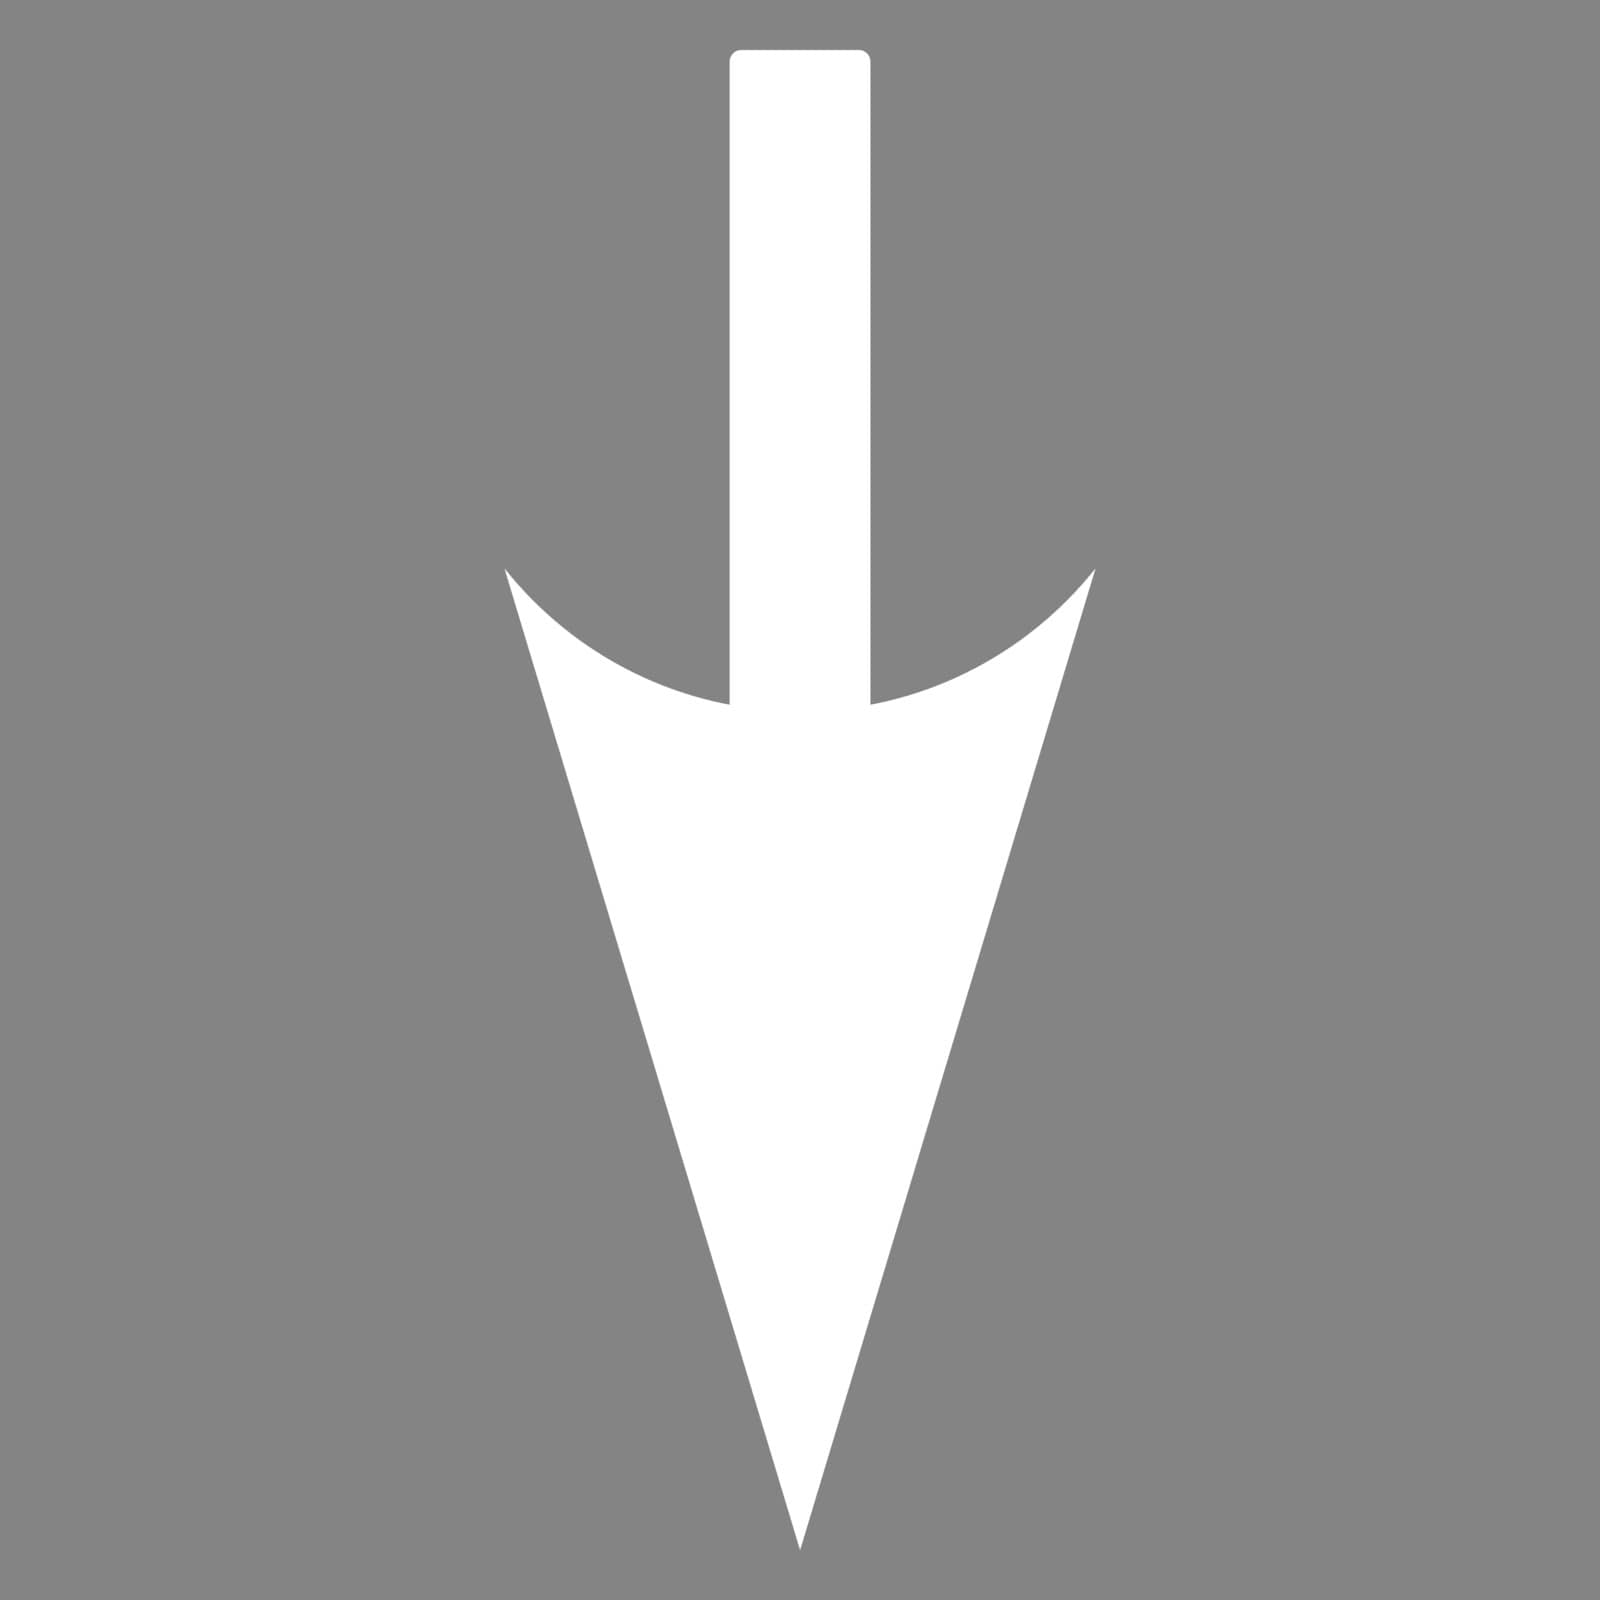 Sharp Down Arrow icon from Primitive Set. This isolated flat symbol is drawn with white color on a gray background.